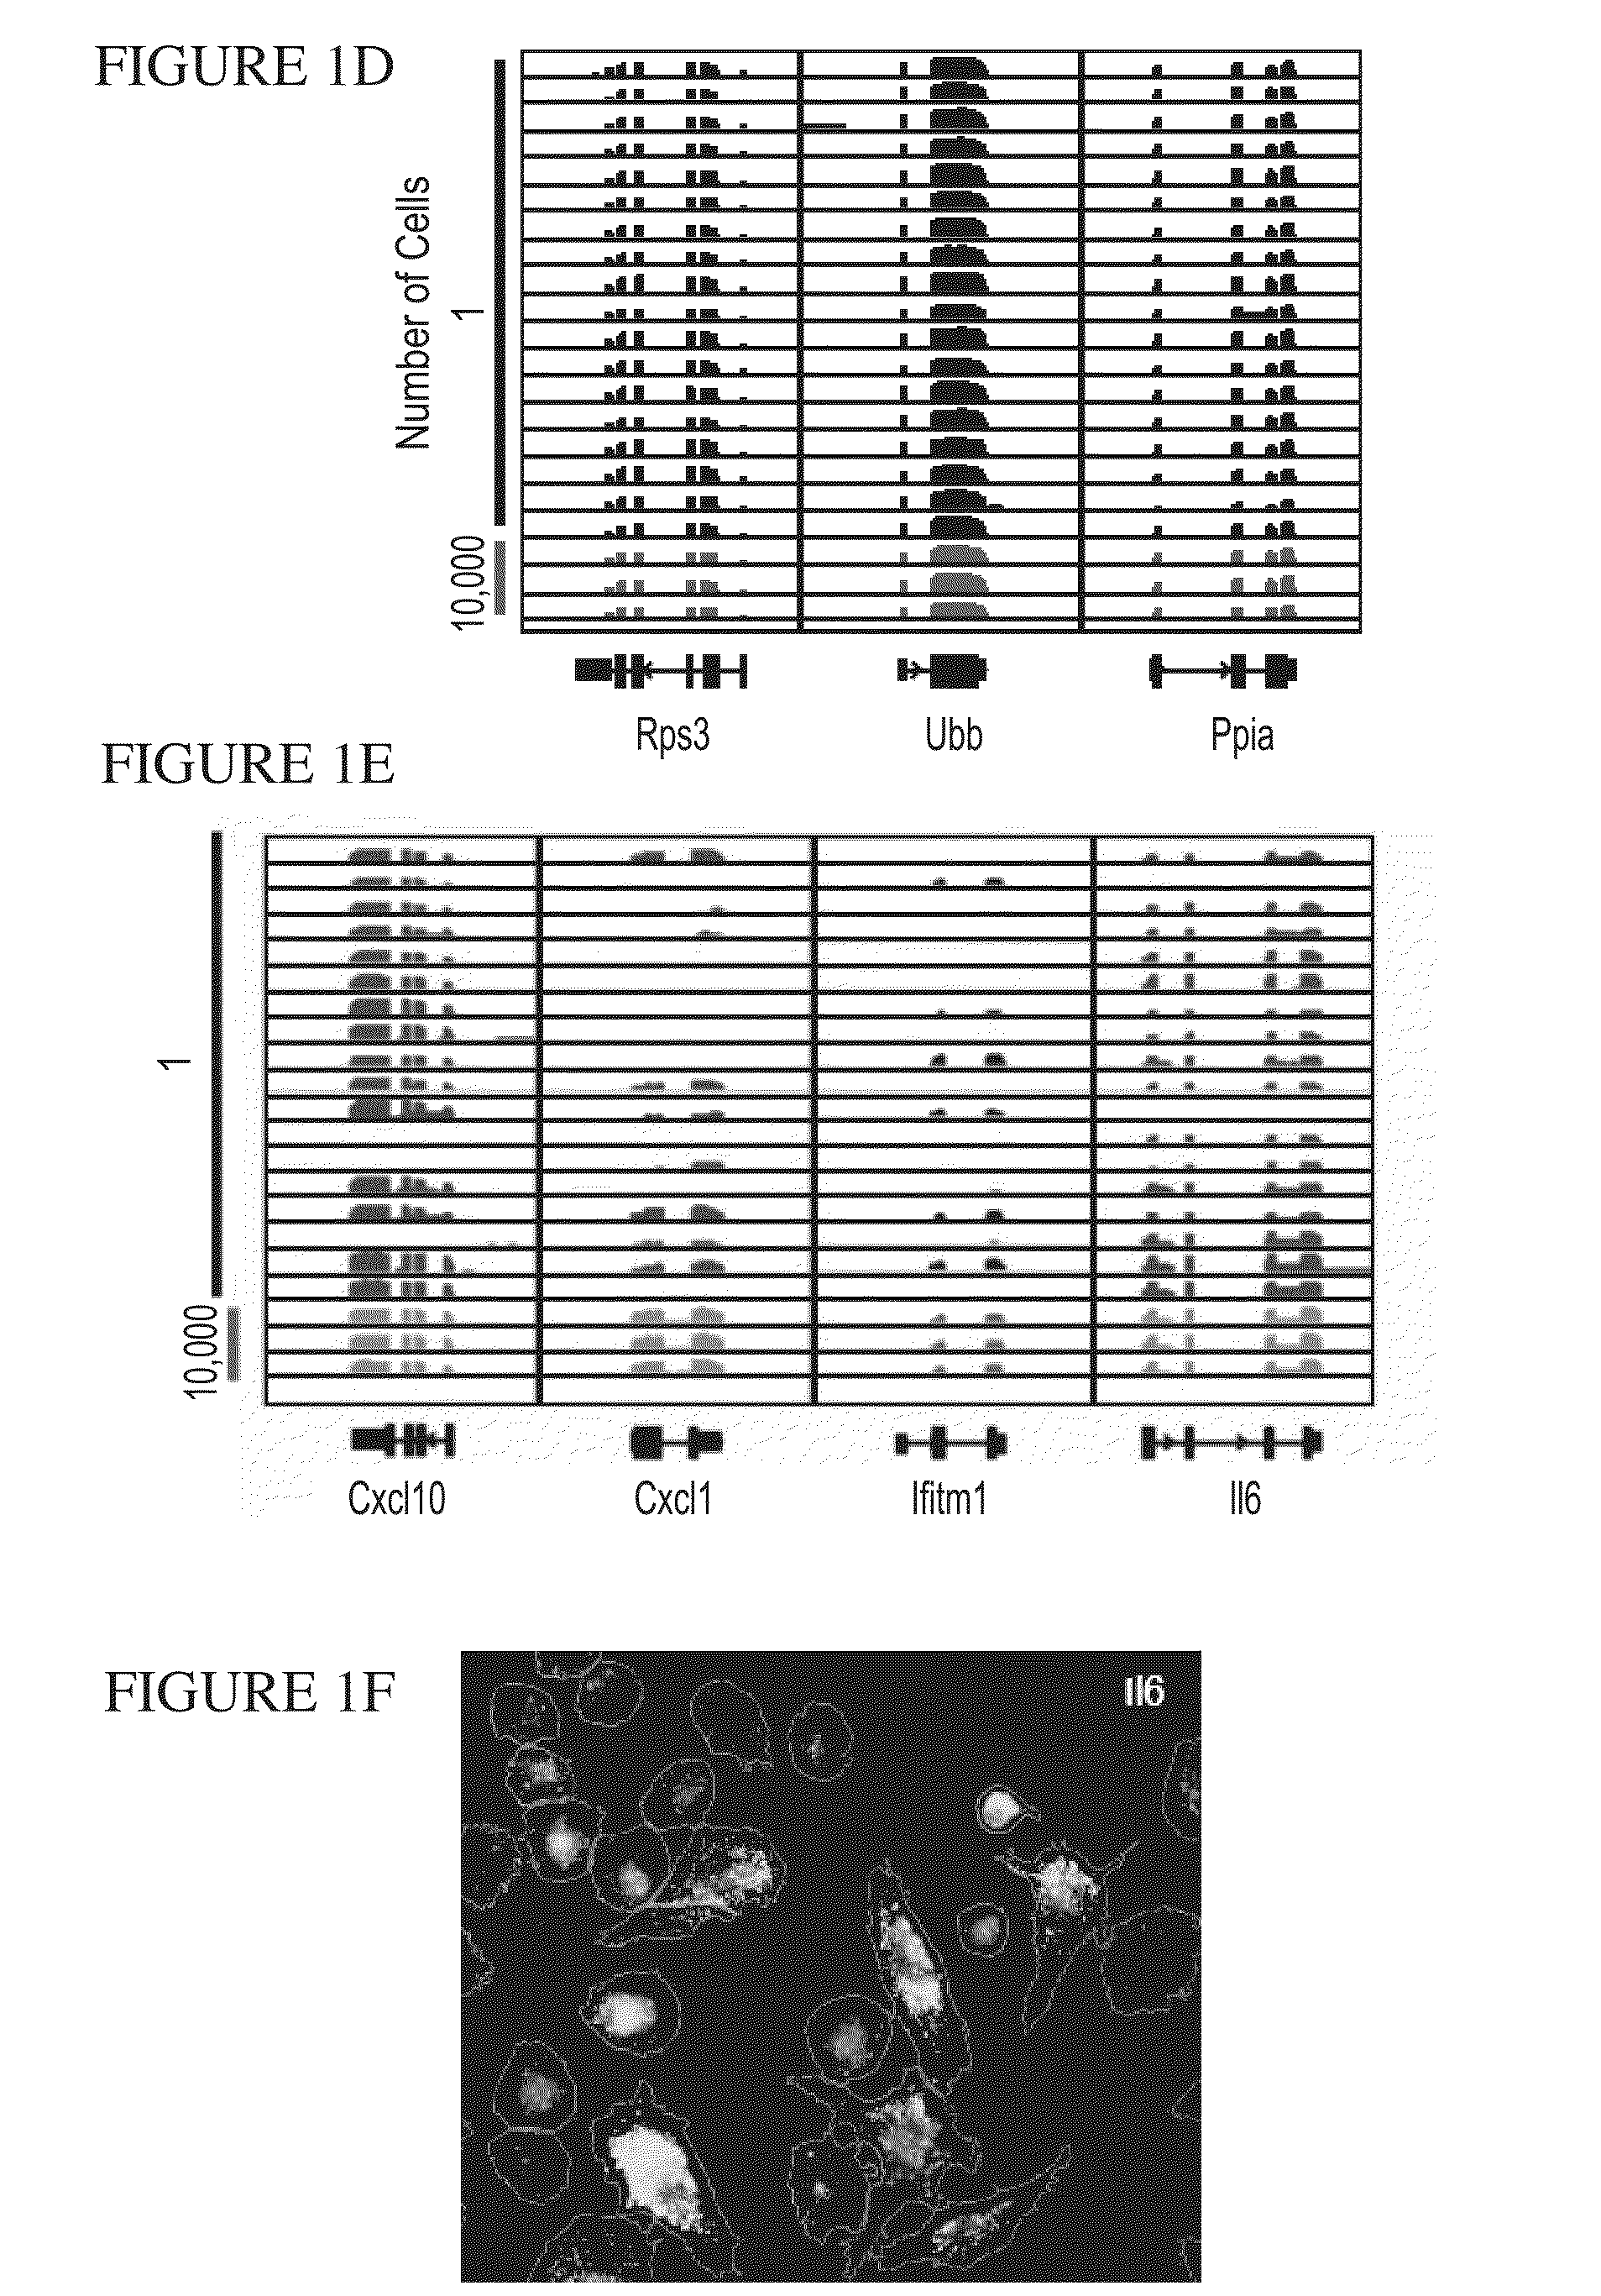 Dendritic cell response gene expression, compositions of matters and methods of use thereof